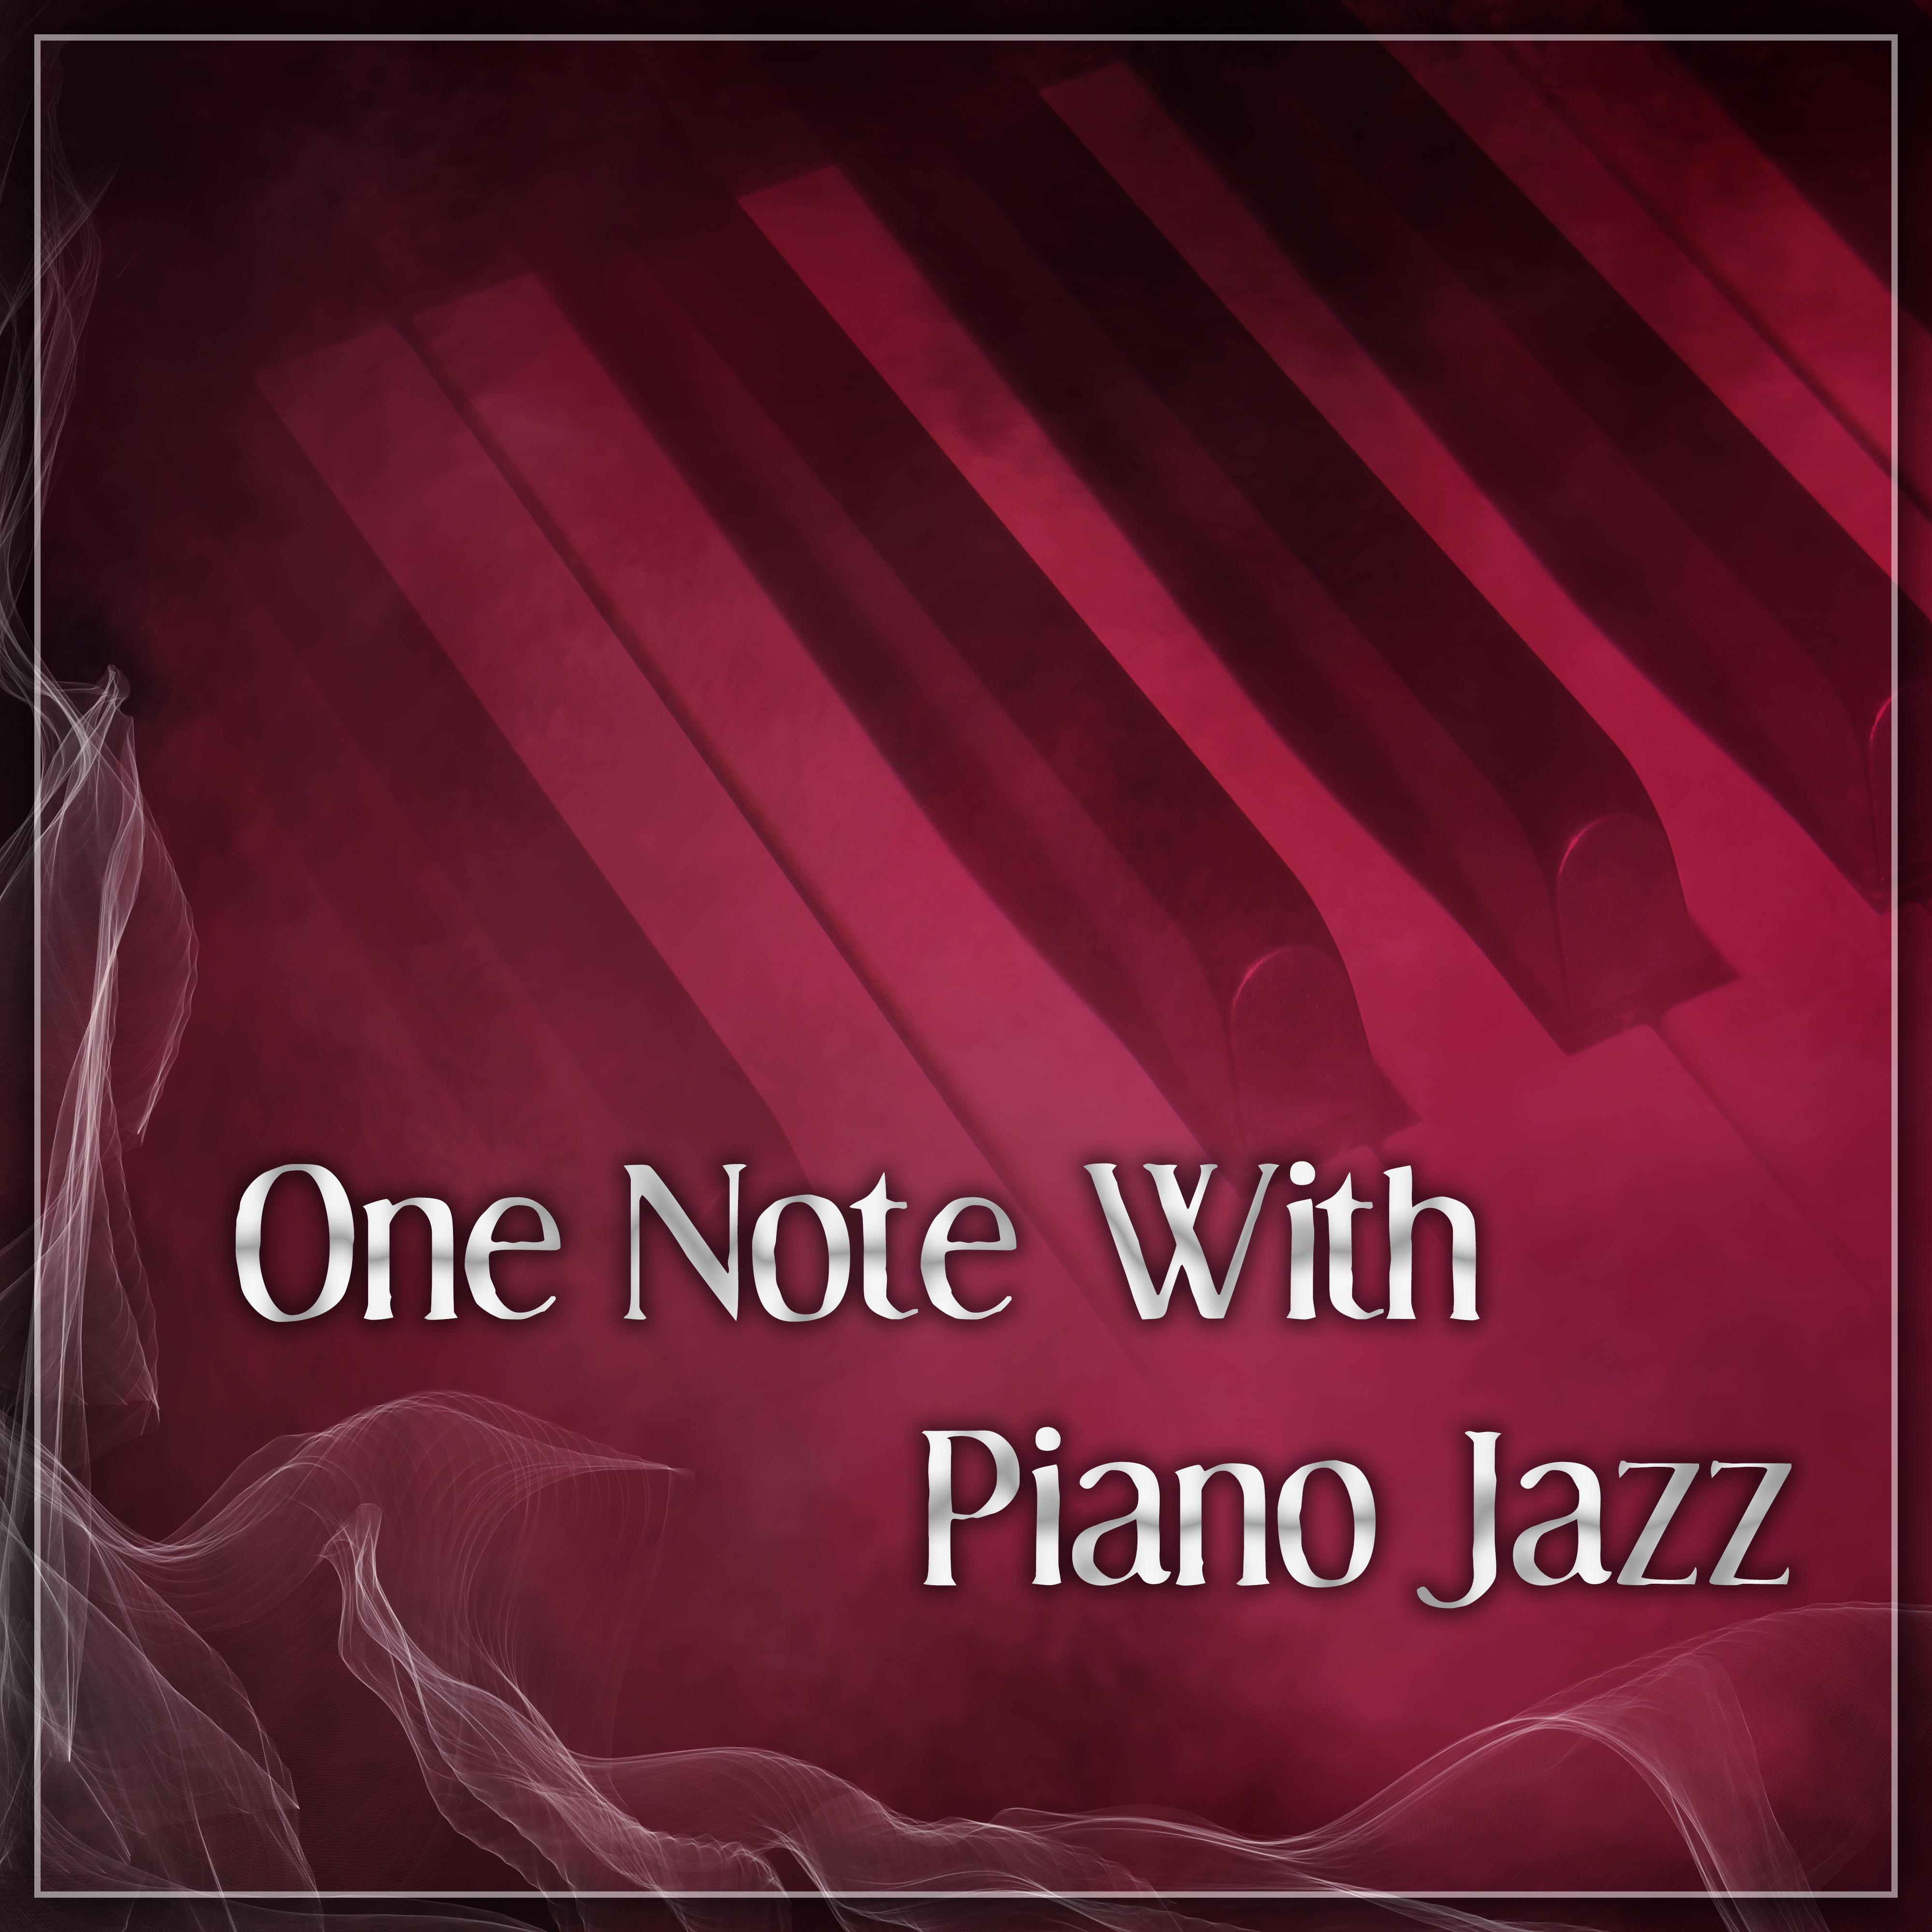 One Note With Piano Jazz  Beautiful Piano Bar, Finest Lounge Music, Best of Smooth Jazz, Morning Coffee